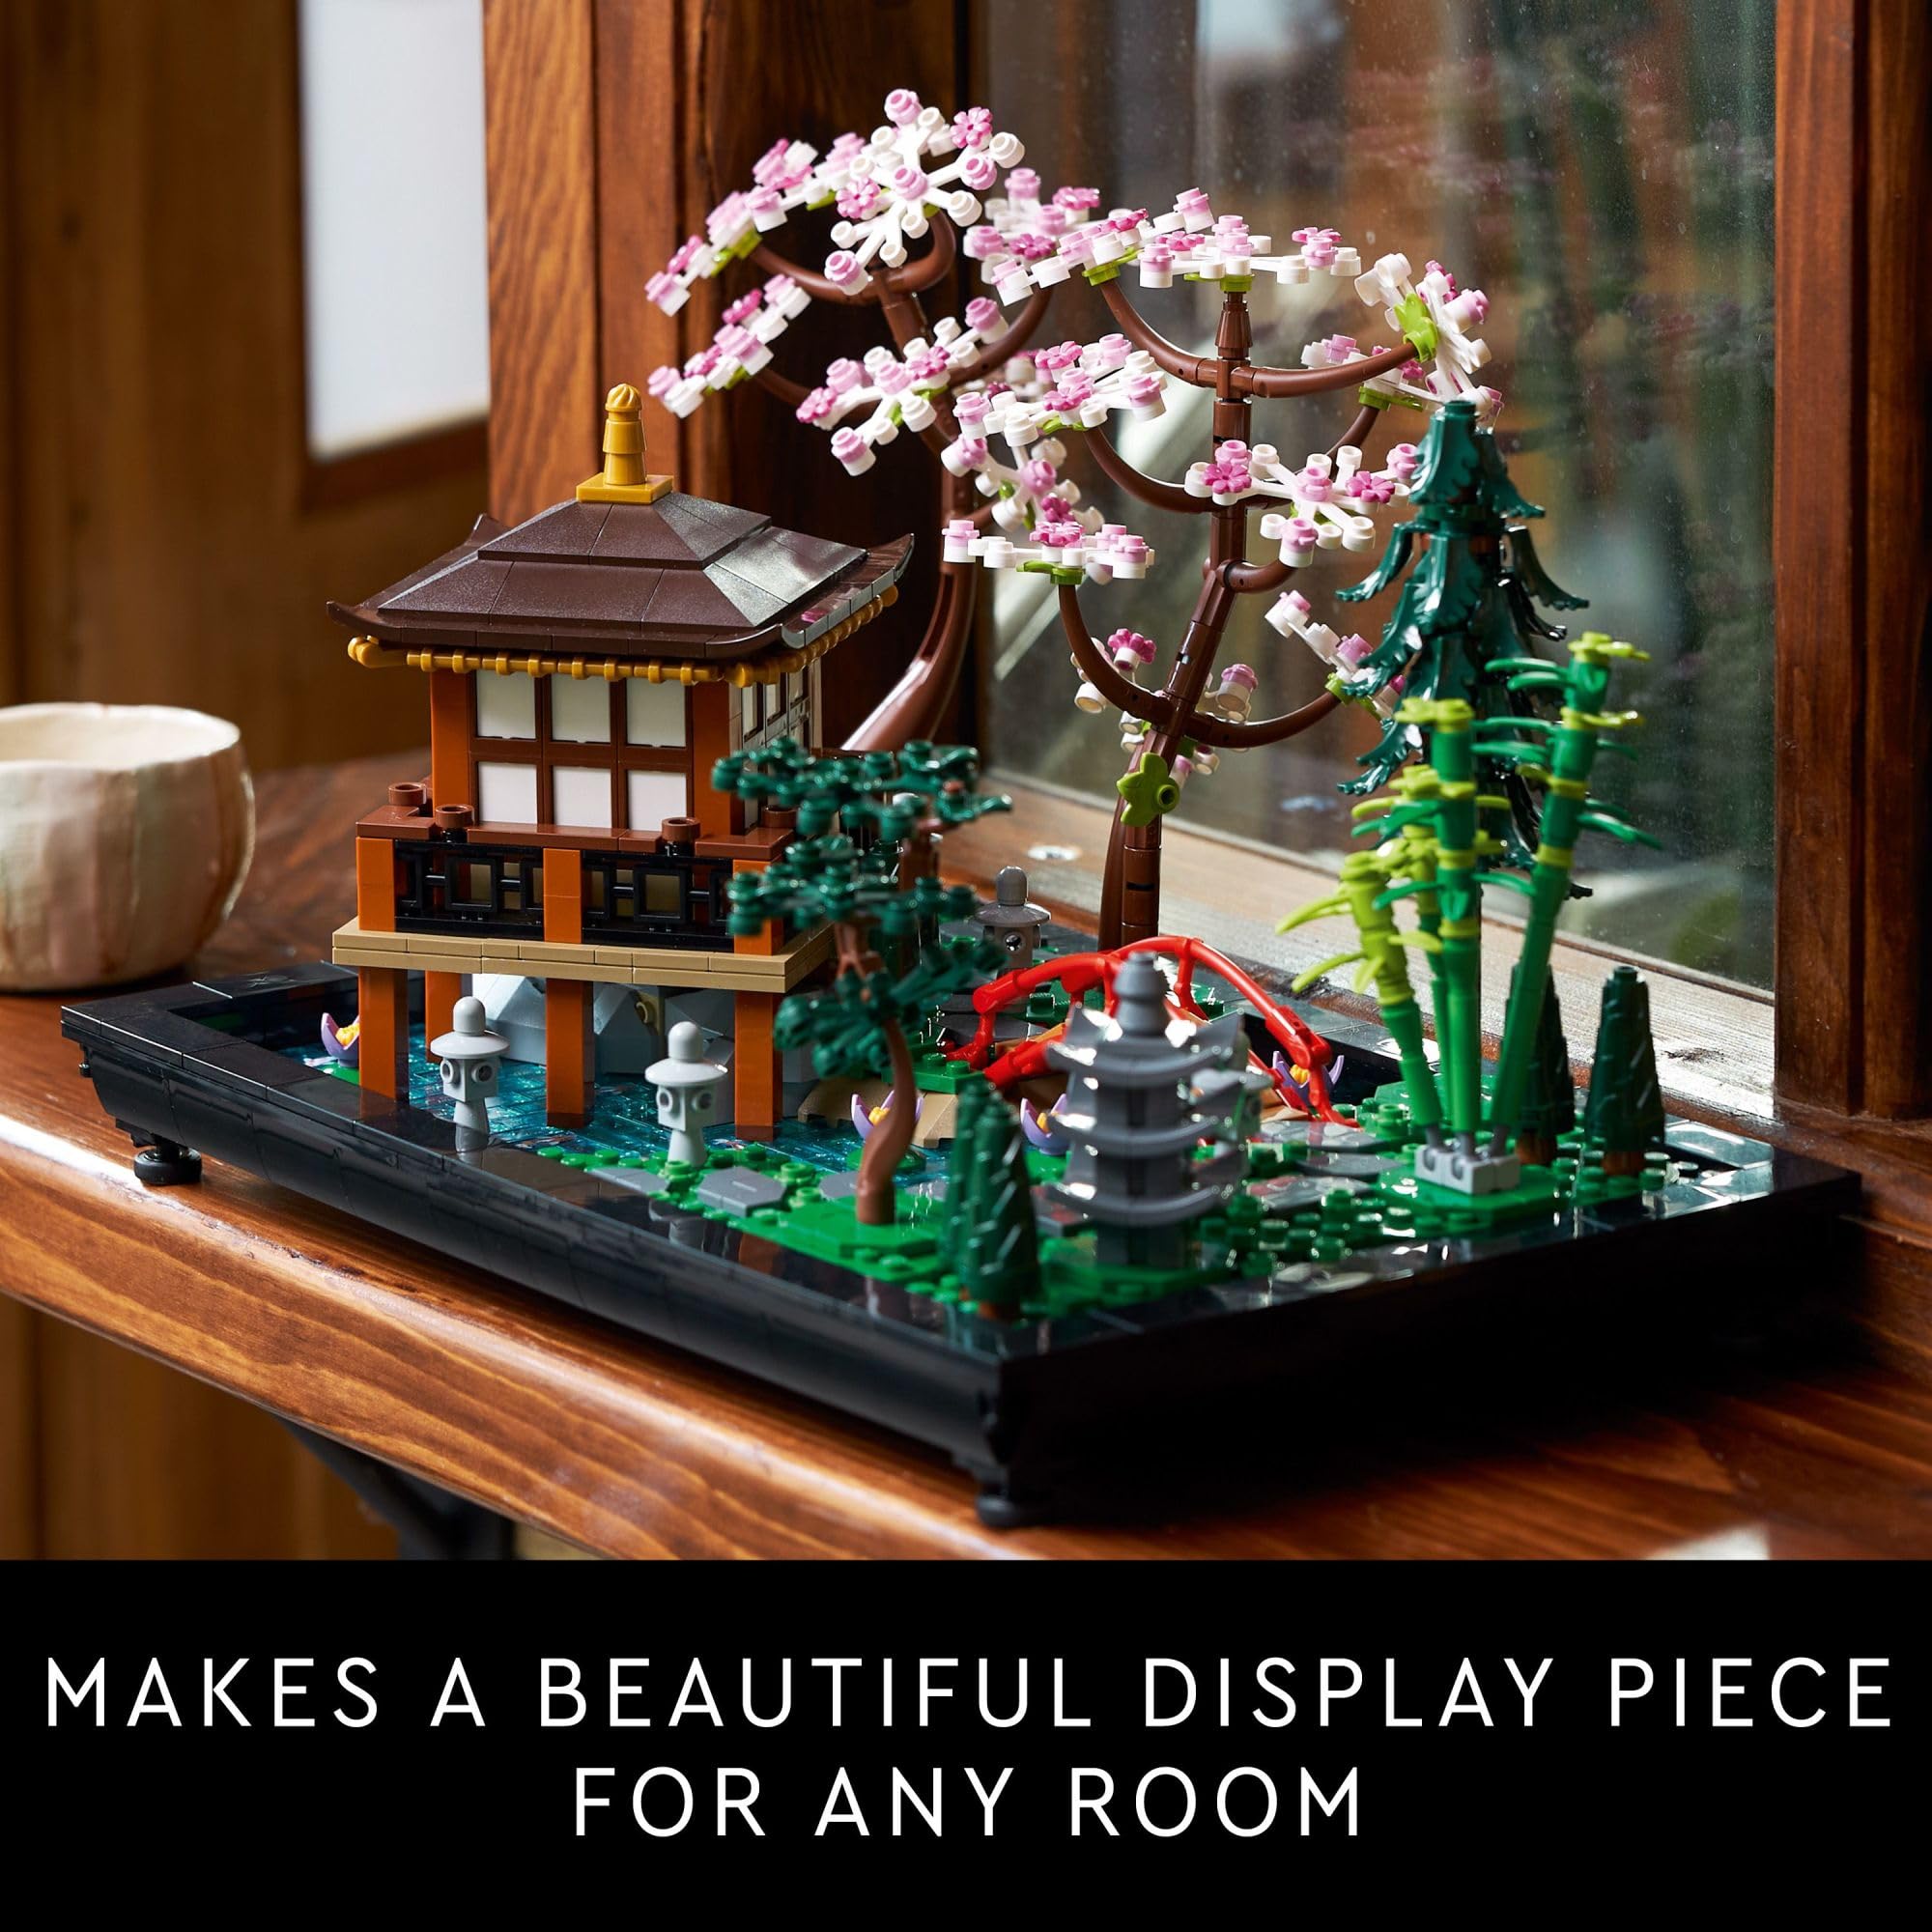 LEGO Icons Tranquil Garden 10315 Creative Building Set, A Gift Idea for Adult Fans of Japanese Zen Gardens and Meditation, Build-and-Display This Home Decor Set for The Home or Office